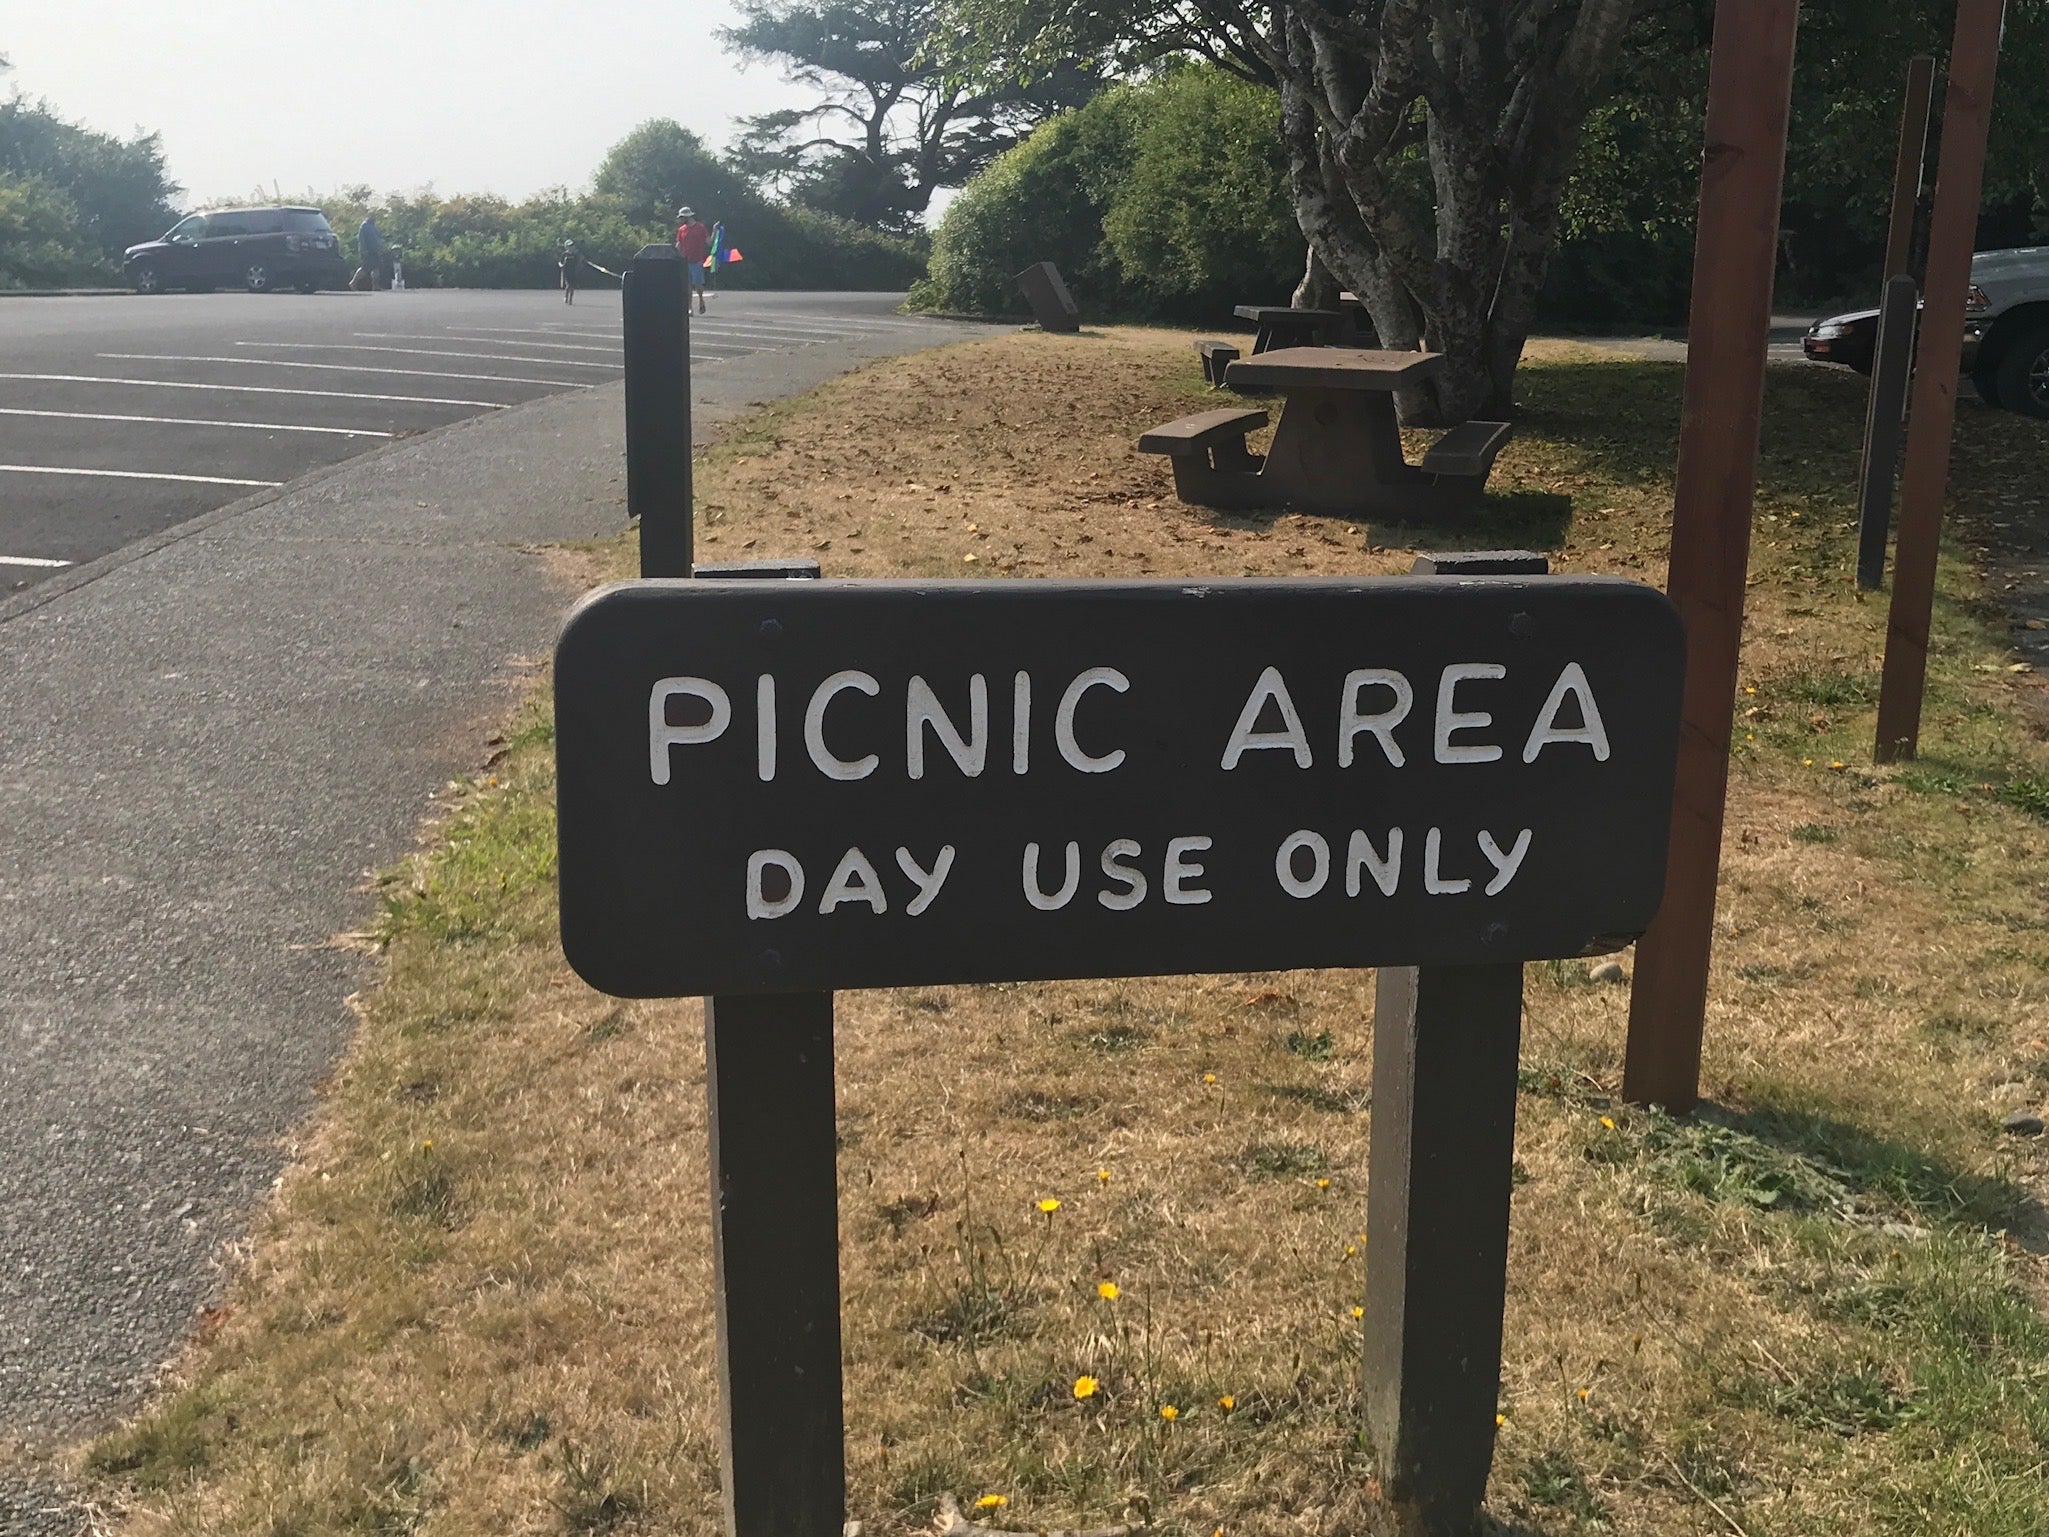 Picnic area if you're just passing through and want to enjoy Kalaloch